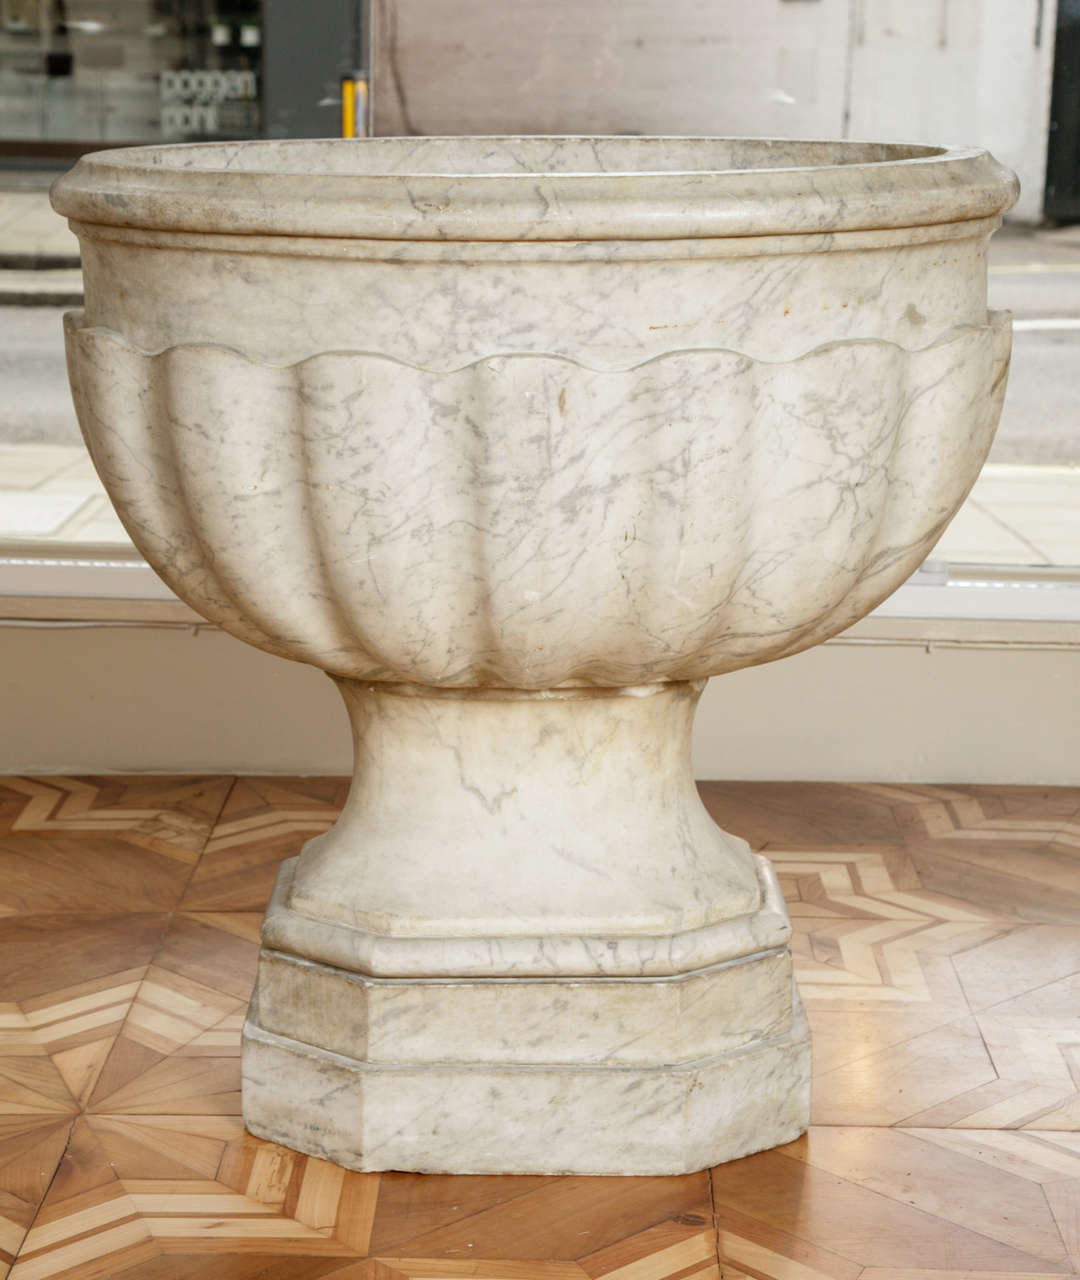 A substantial cistern, carved out of grey and white marble. With a moulded lip above a gadrooned basin, on a waisted support with lozenge-shaped base. 

Measurements: 27 1/2